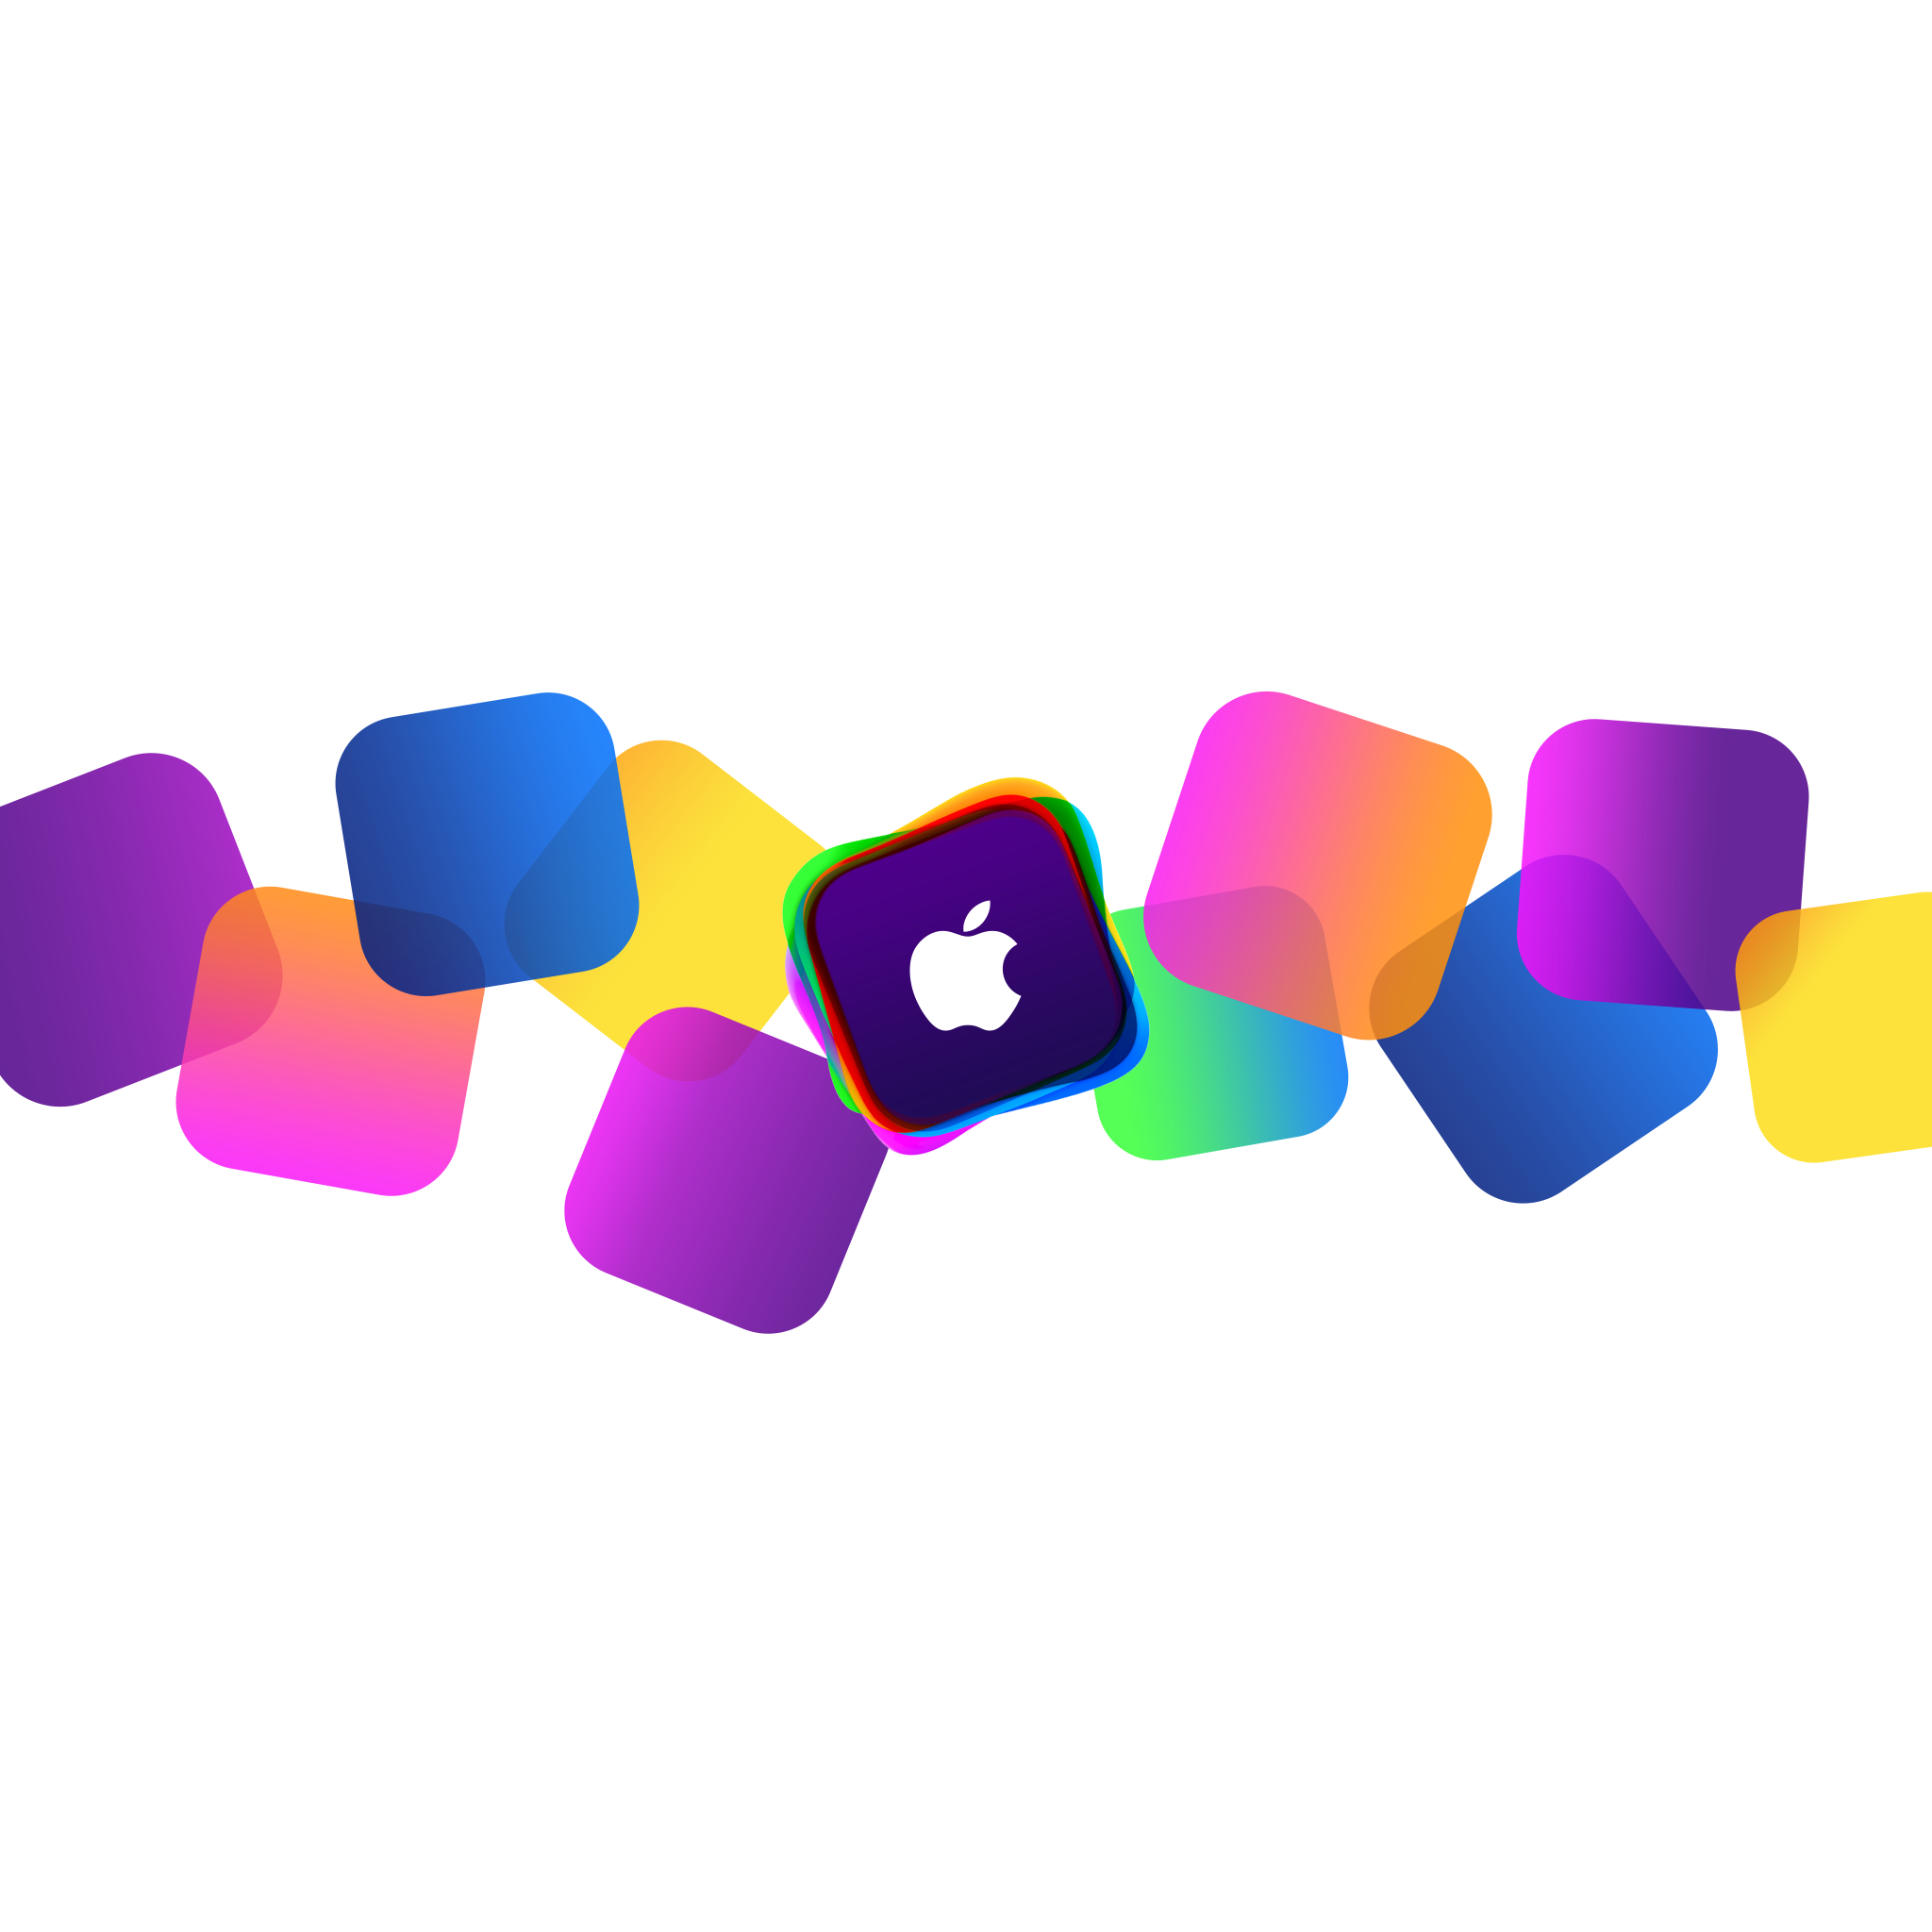 Get Hype For Wwdc 2013 With These Colorful Wallpapers - Apple Mac , HD Wallpaper & Backgrounds